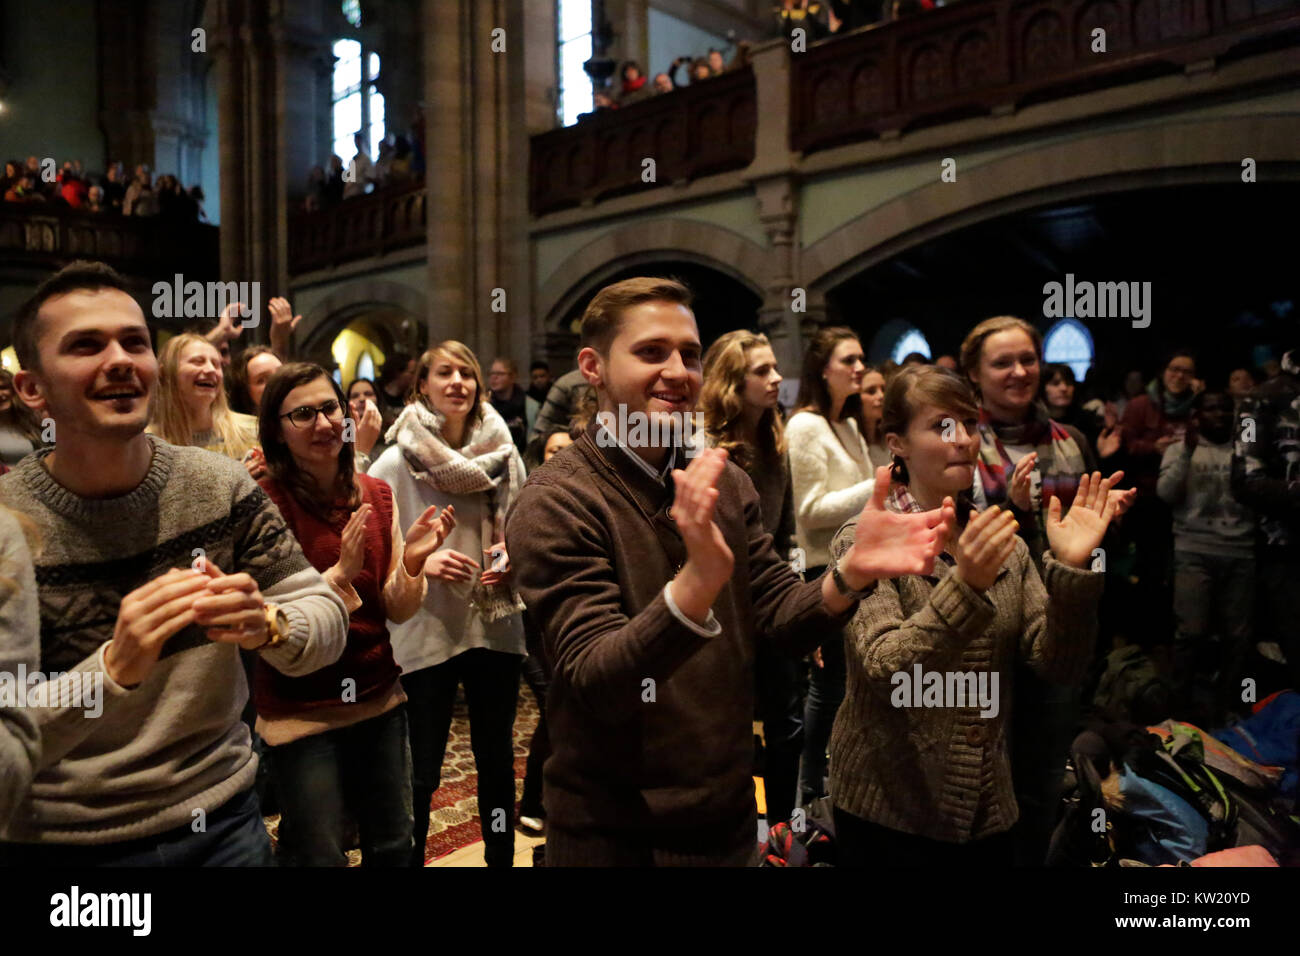 Basel, Switzerland. 29th December 2017. Young pilgrims sing and dance in the Matthäuskirche to music performed by African Christians. unity also held a press conference with some informations about the meeting. Credit: Michael Debets/Alamy Live News Stock Photo